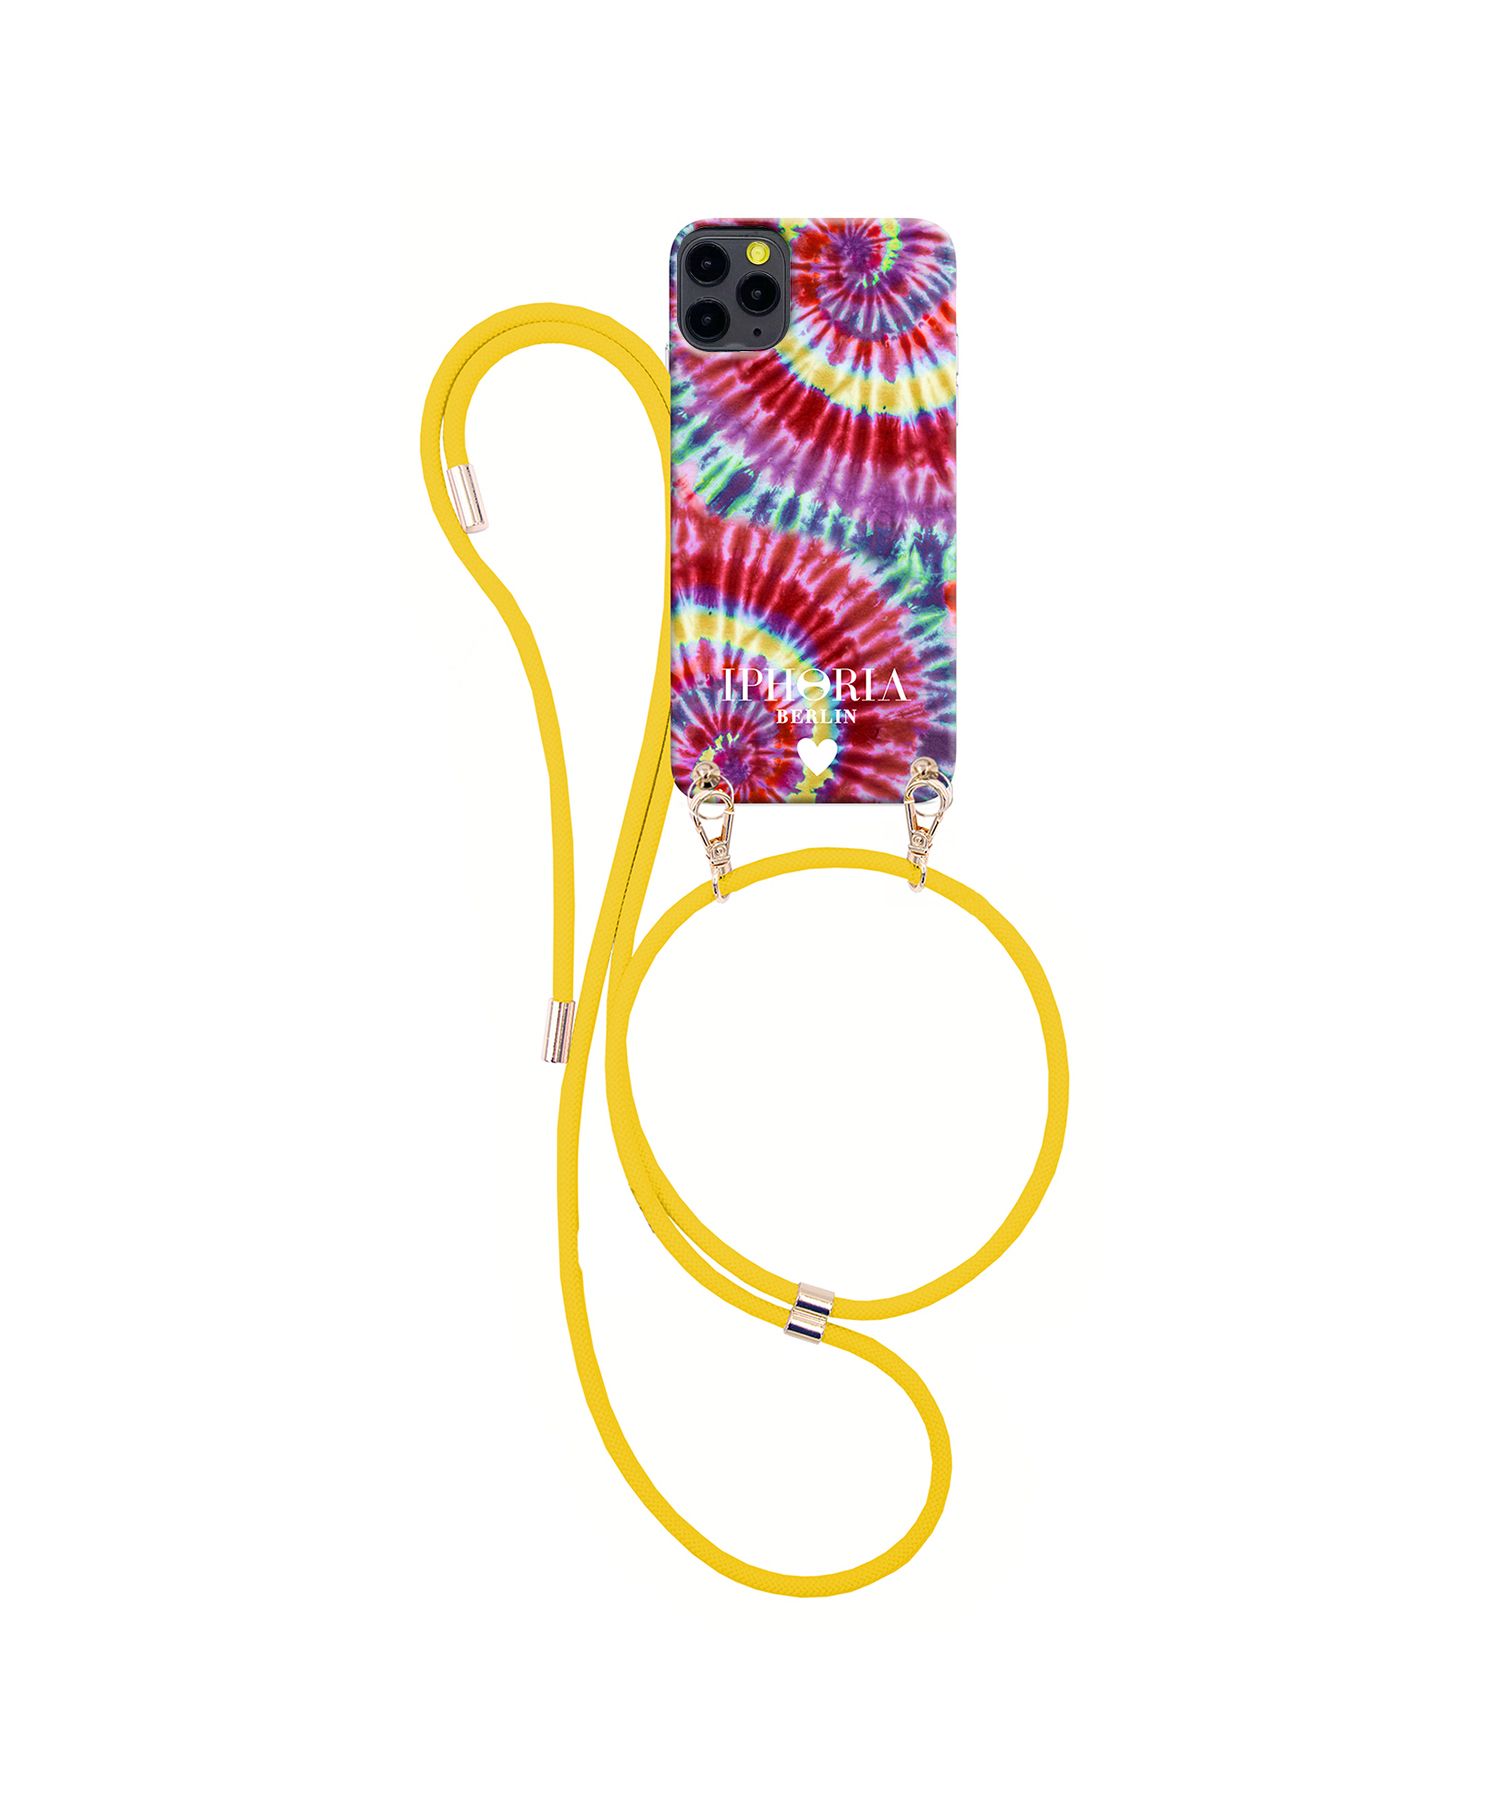 Necklace Case for Apple iPhone 12/12 Pro - Tie Dye Colorful